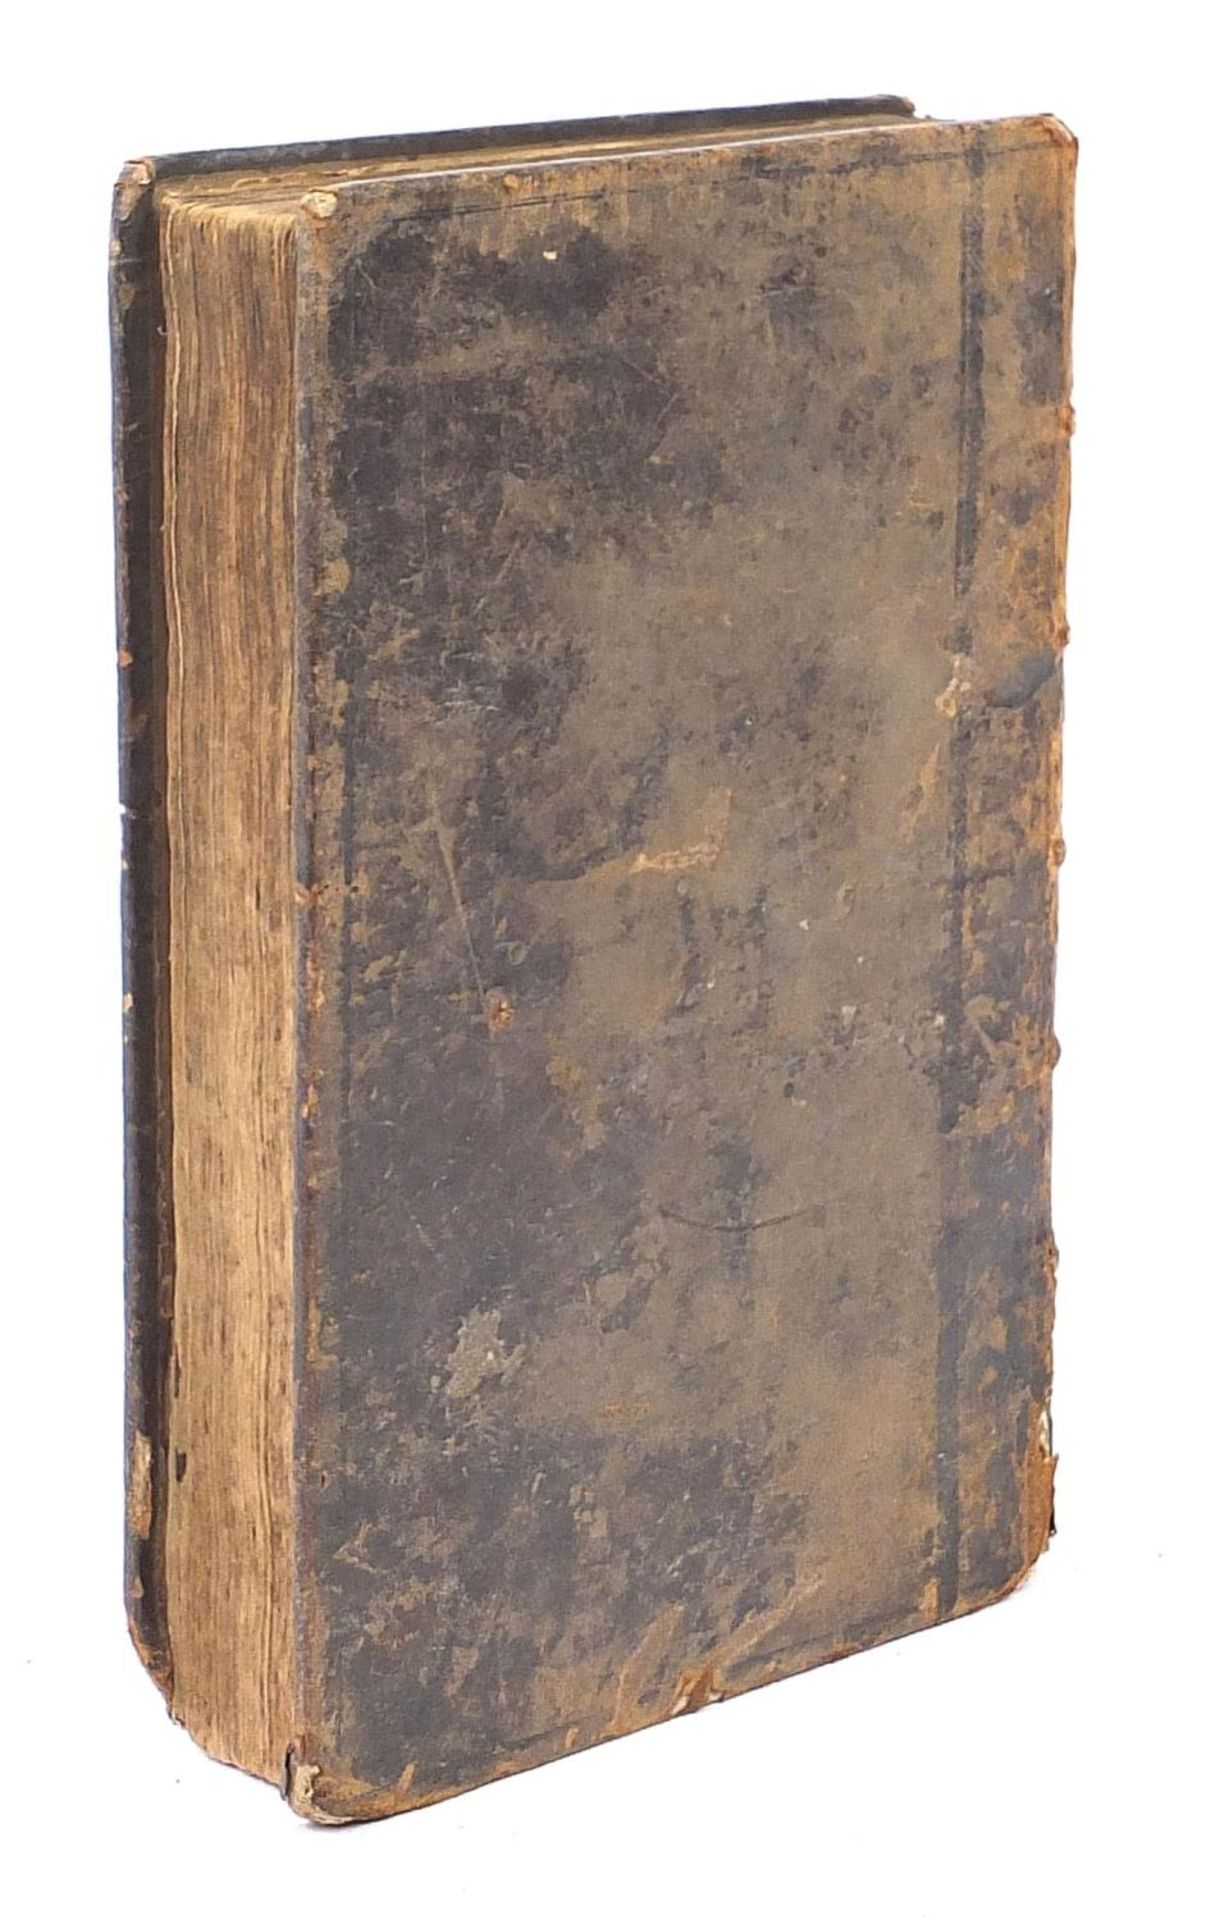 The history of the Worthies of England by Thomas Fuller, 17th century leather bound hardback book - Image 6 of 6